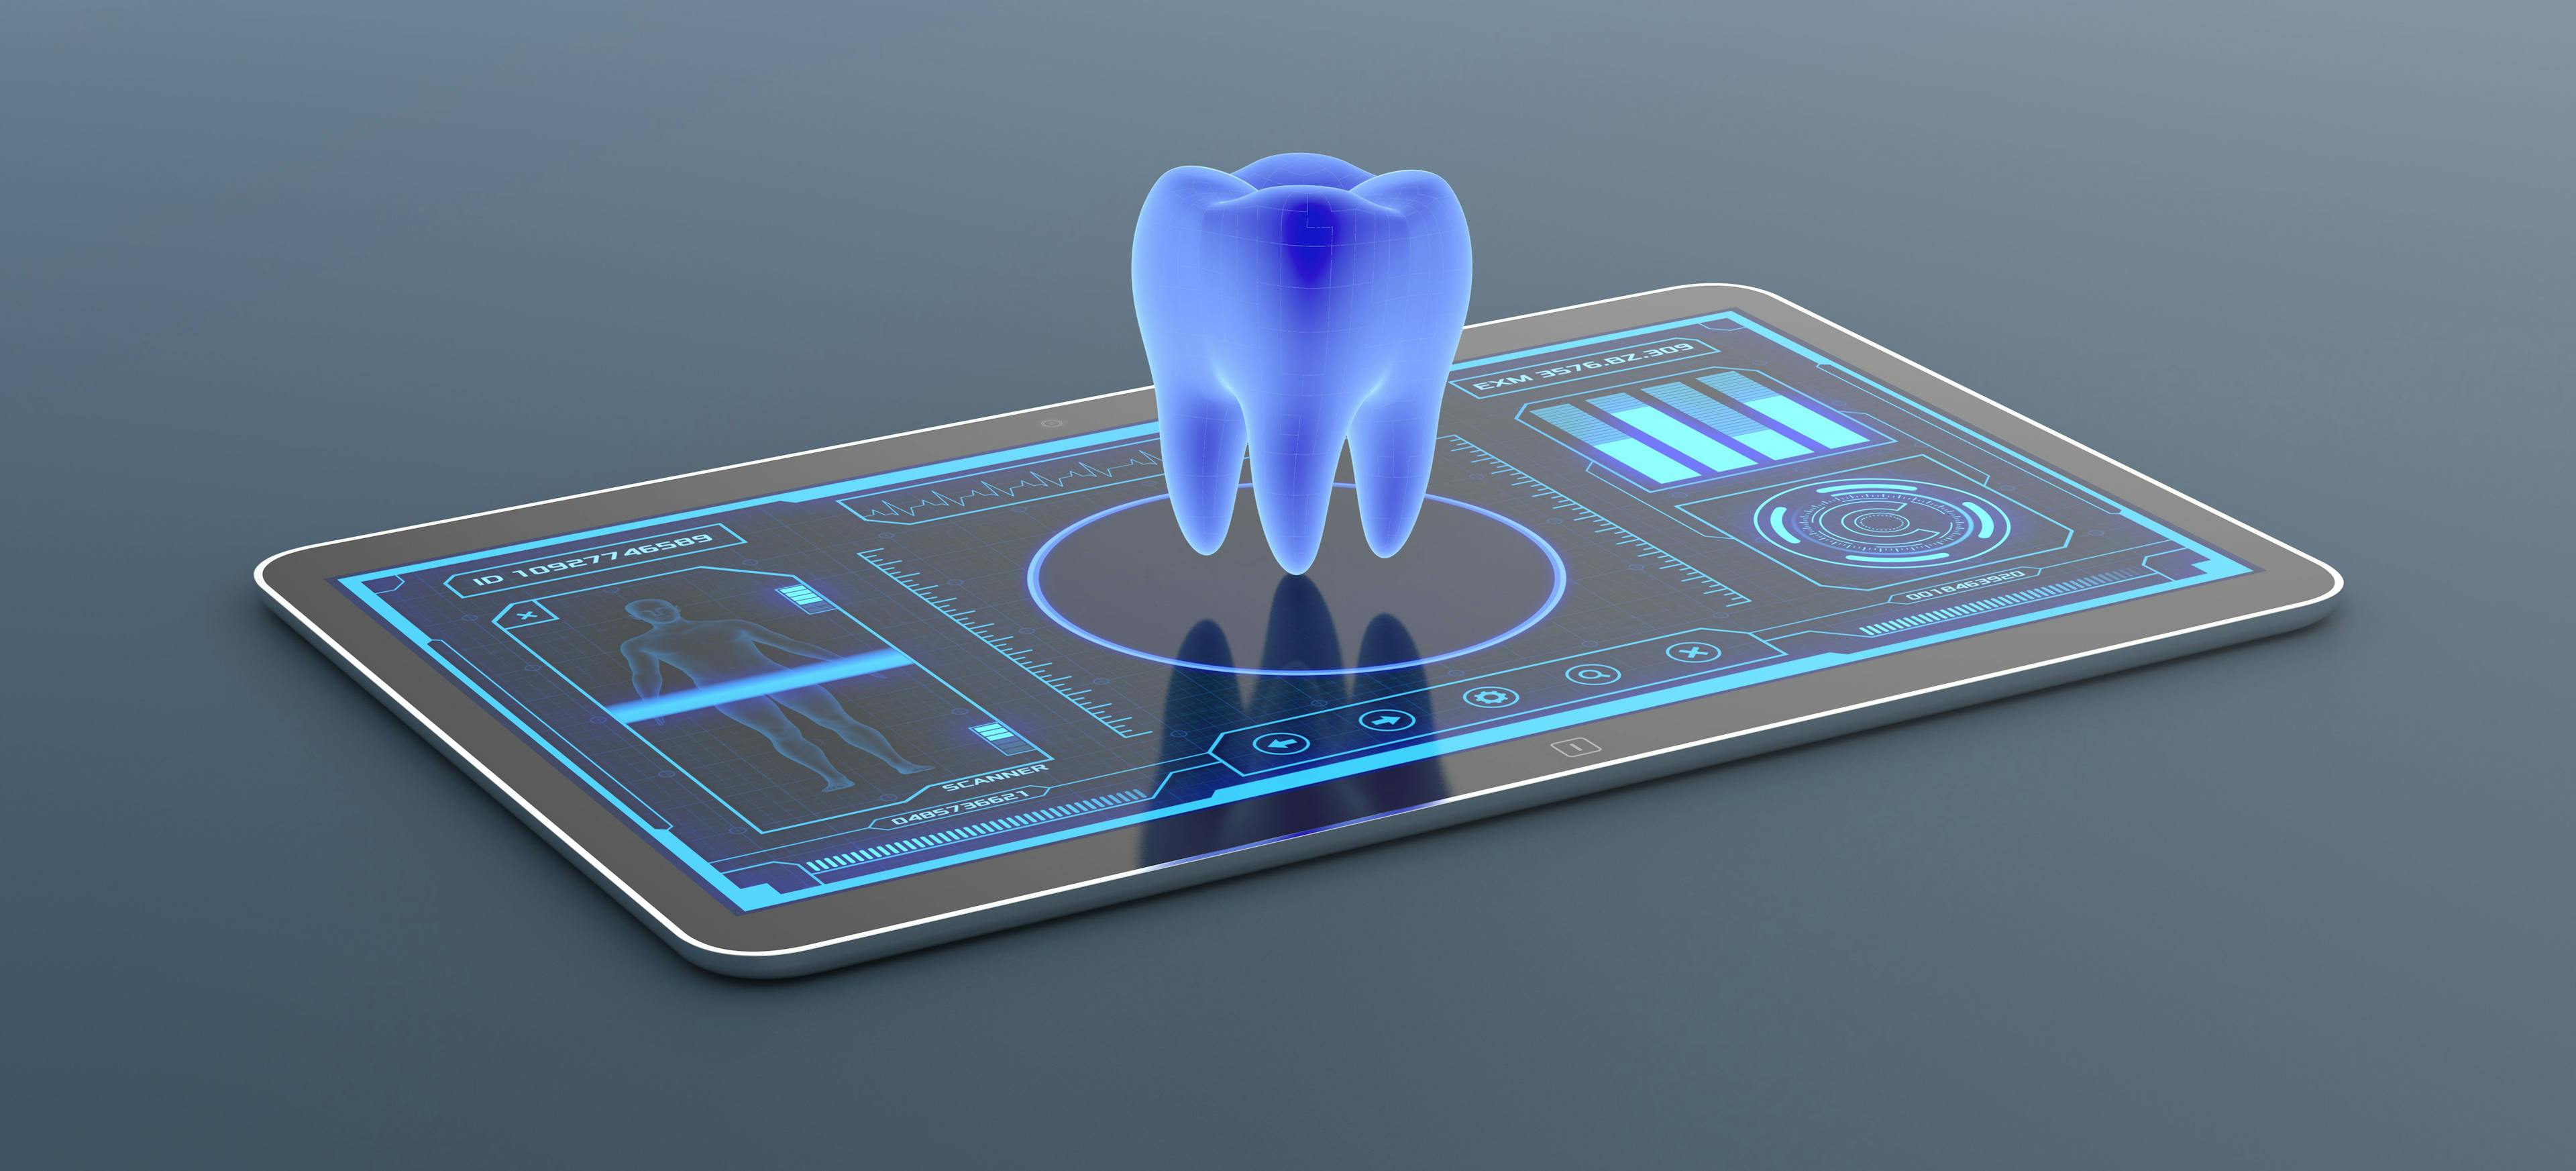 Top 6 Reasons to Implement Teledentistry Now